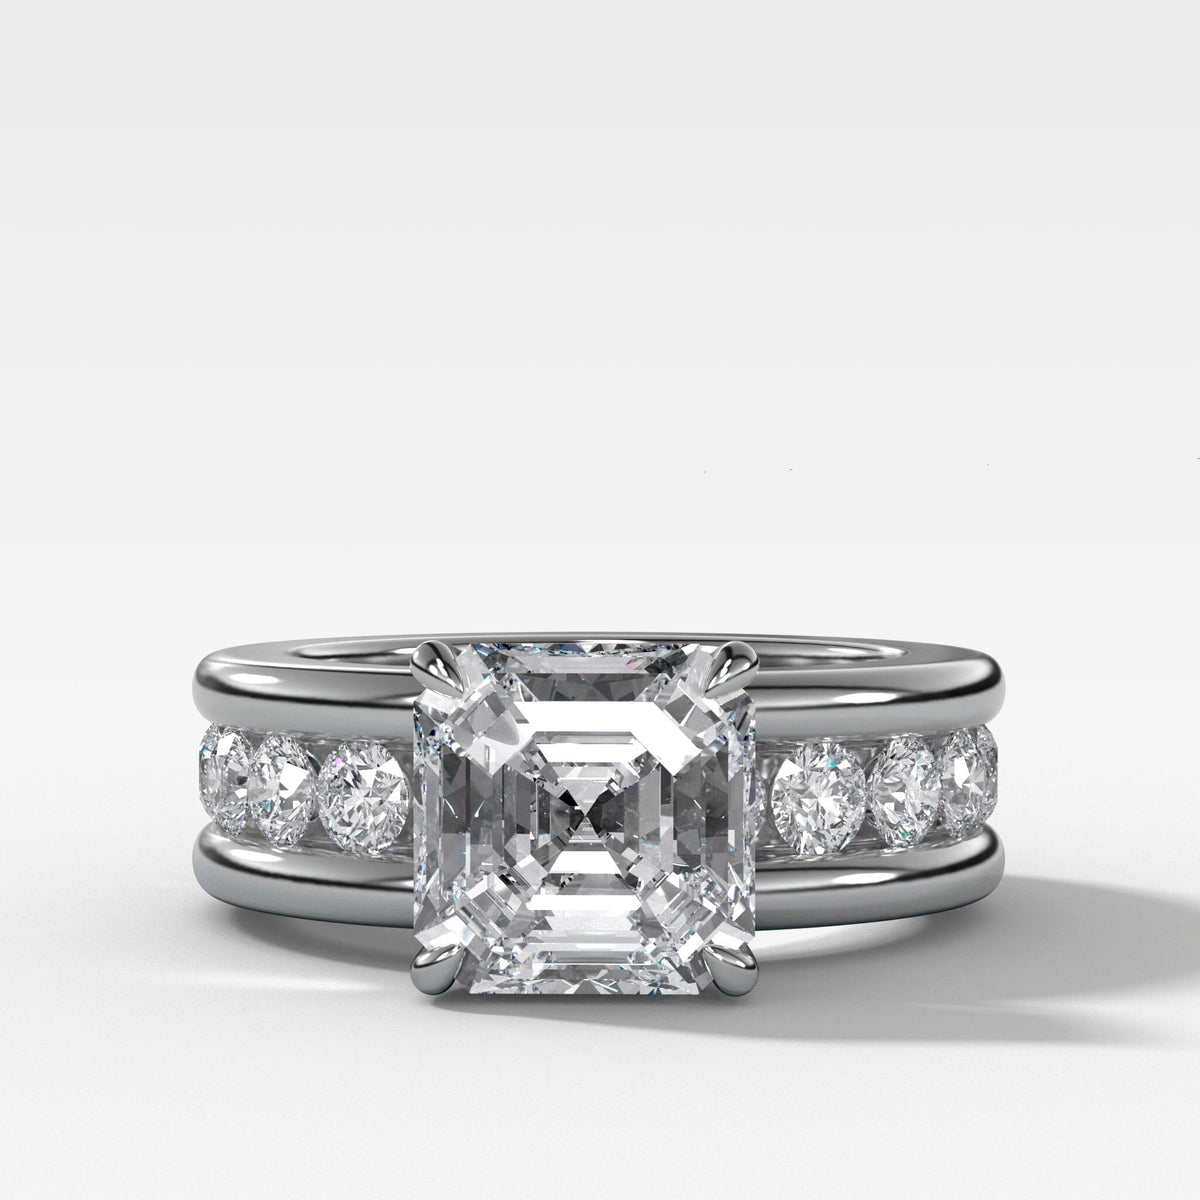 Petite Channel Set Engagement Ring with Round Cut Diamond - GOODSTONE